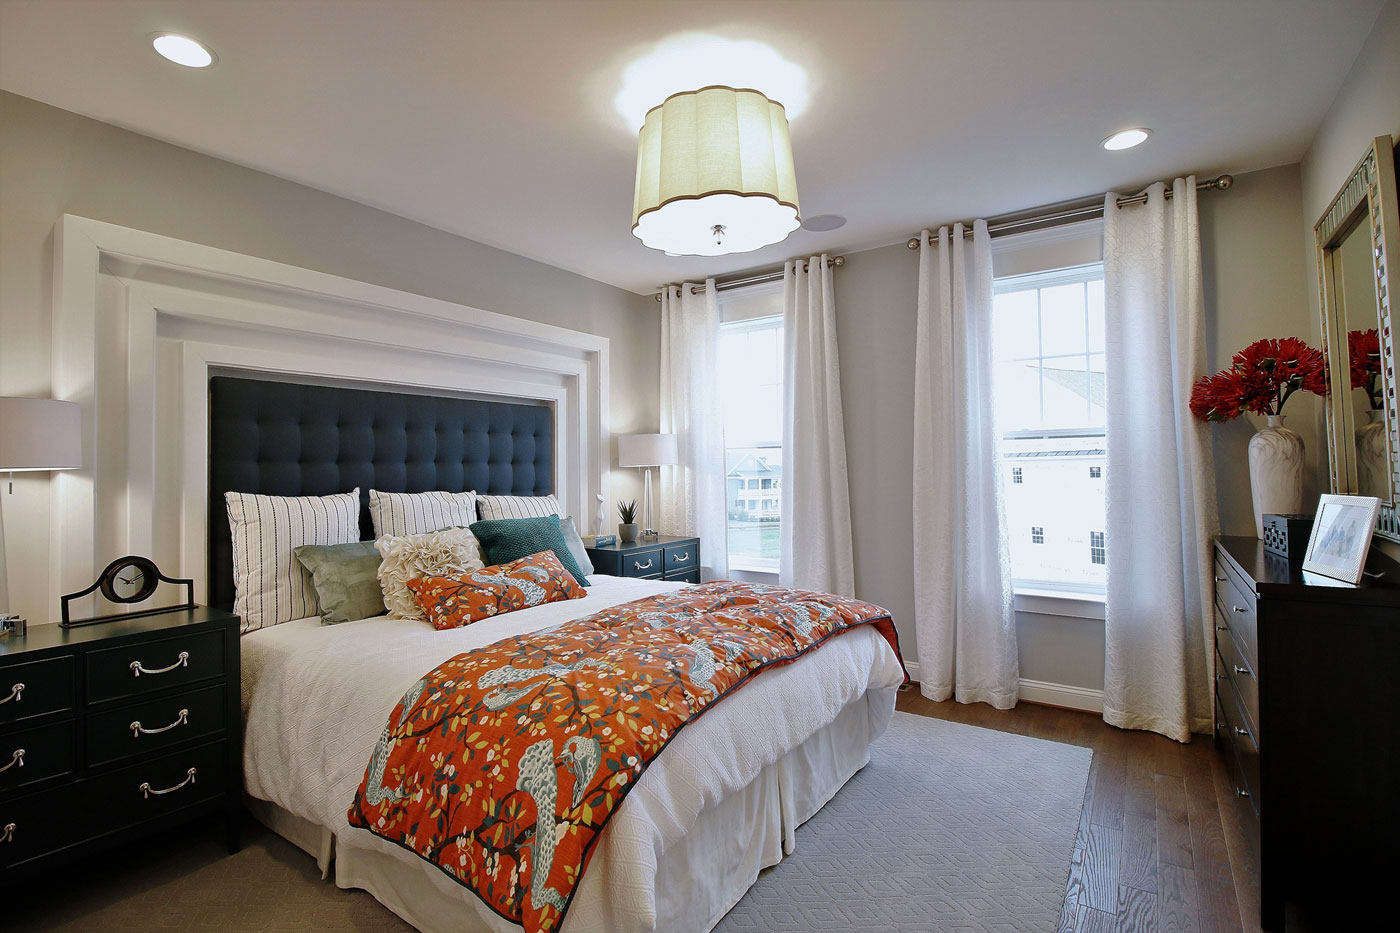 Maryland apartment master bedroom model merchandised with orange bedspread and dramatic upholstered headboard.